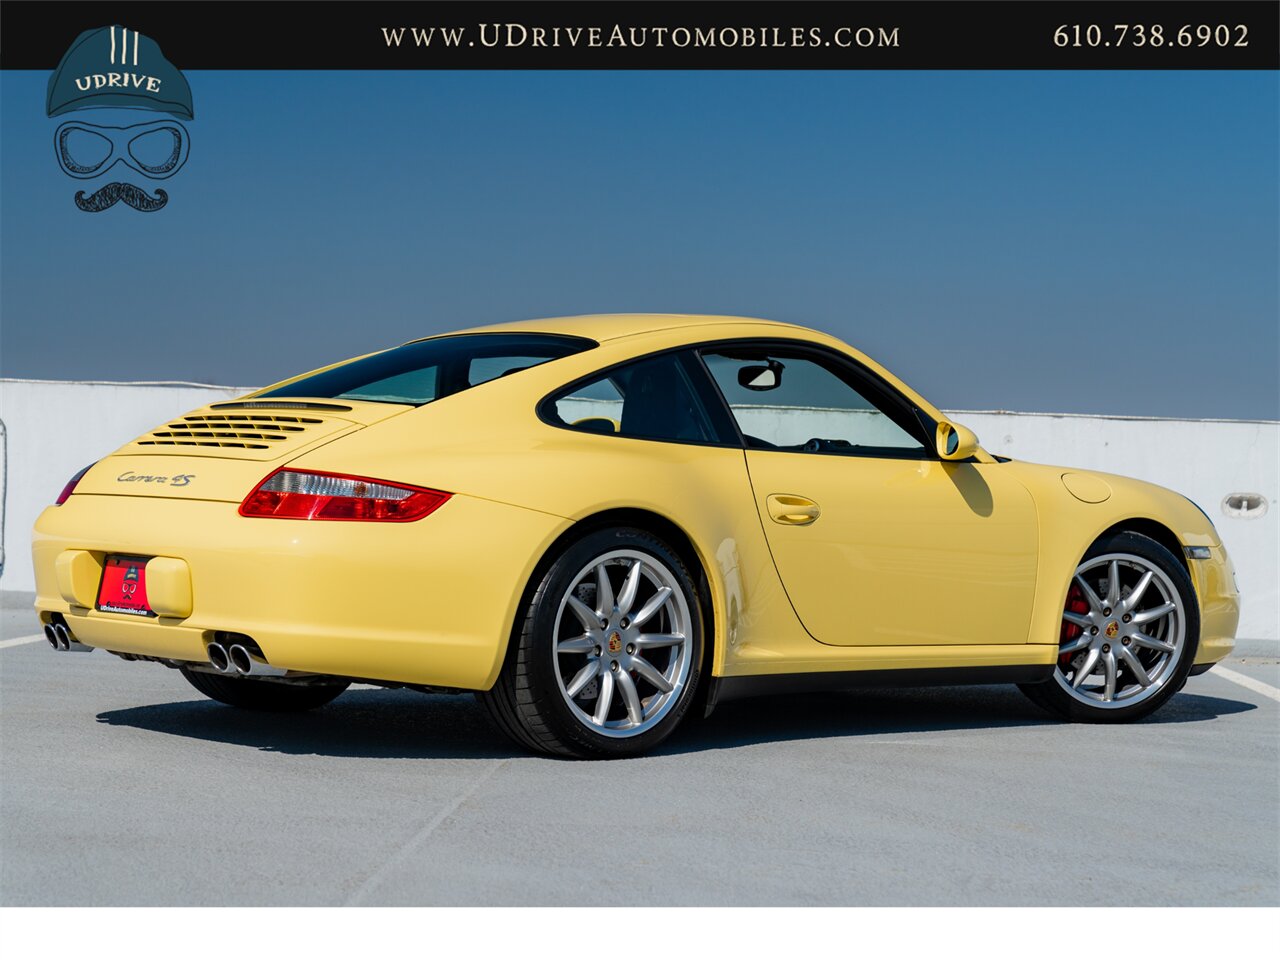 2007 Porsche 911 Carrera 4S 997 C4S Paint To Sample Pastel Yellow  6 Speed Sport Chrono Full Leather Yellow Gauges - Photo 3 - West Chester, PA 19382